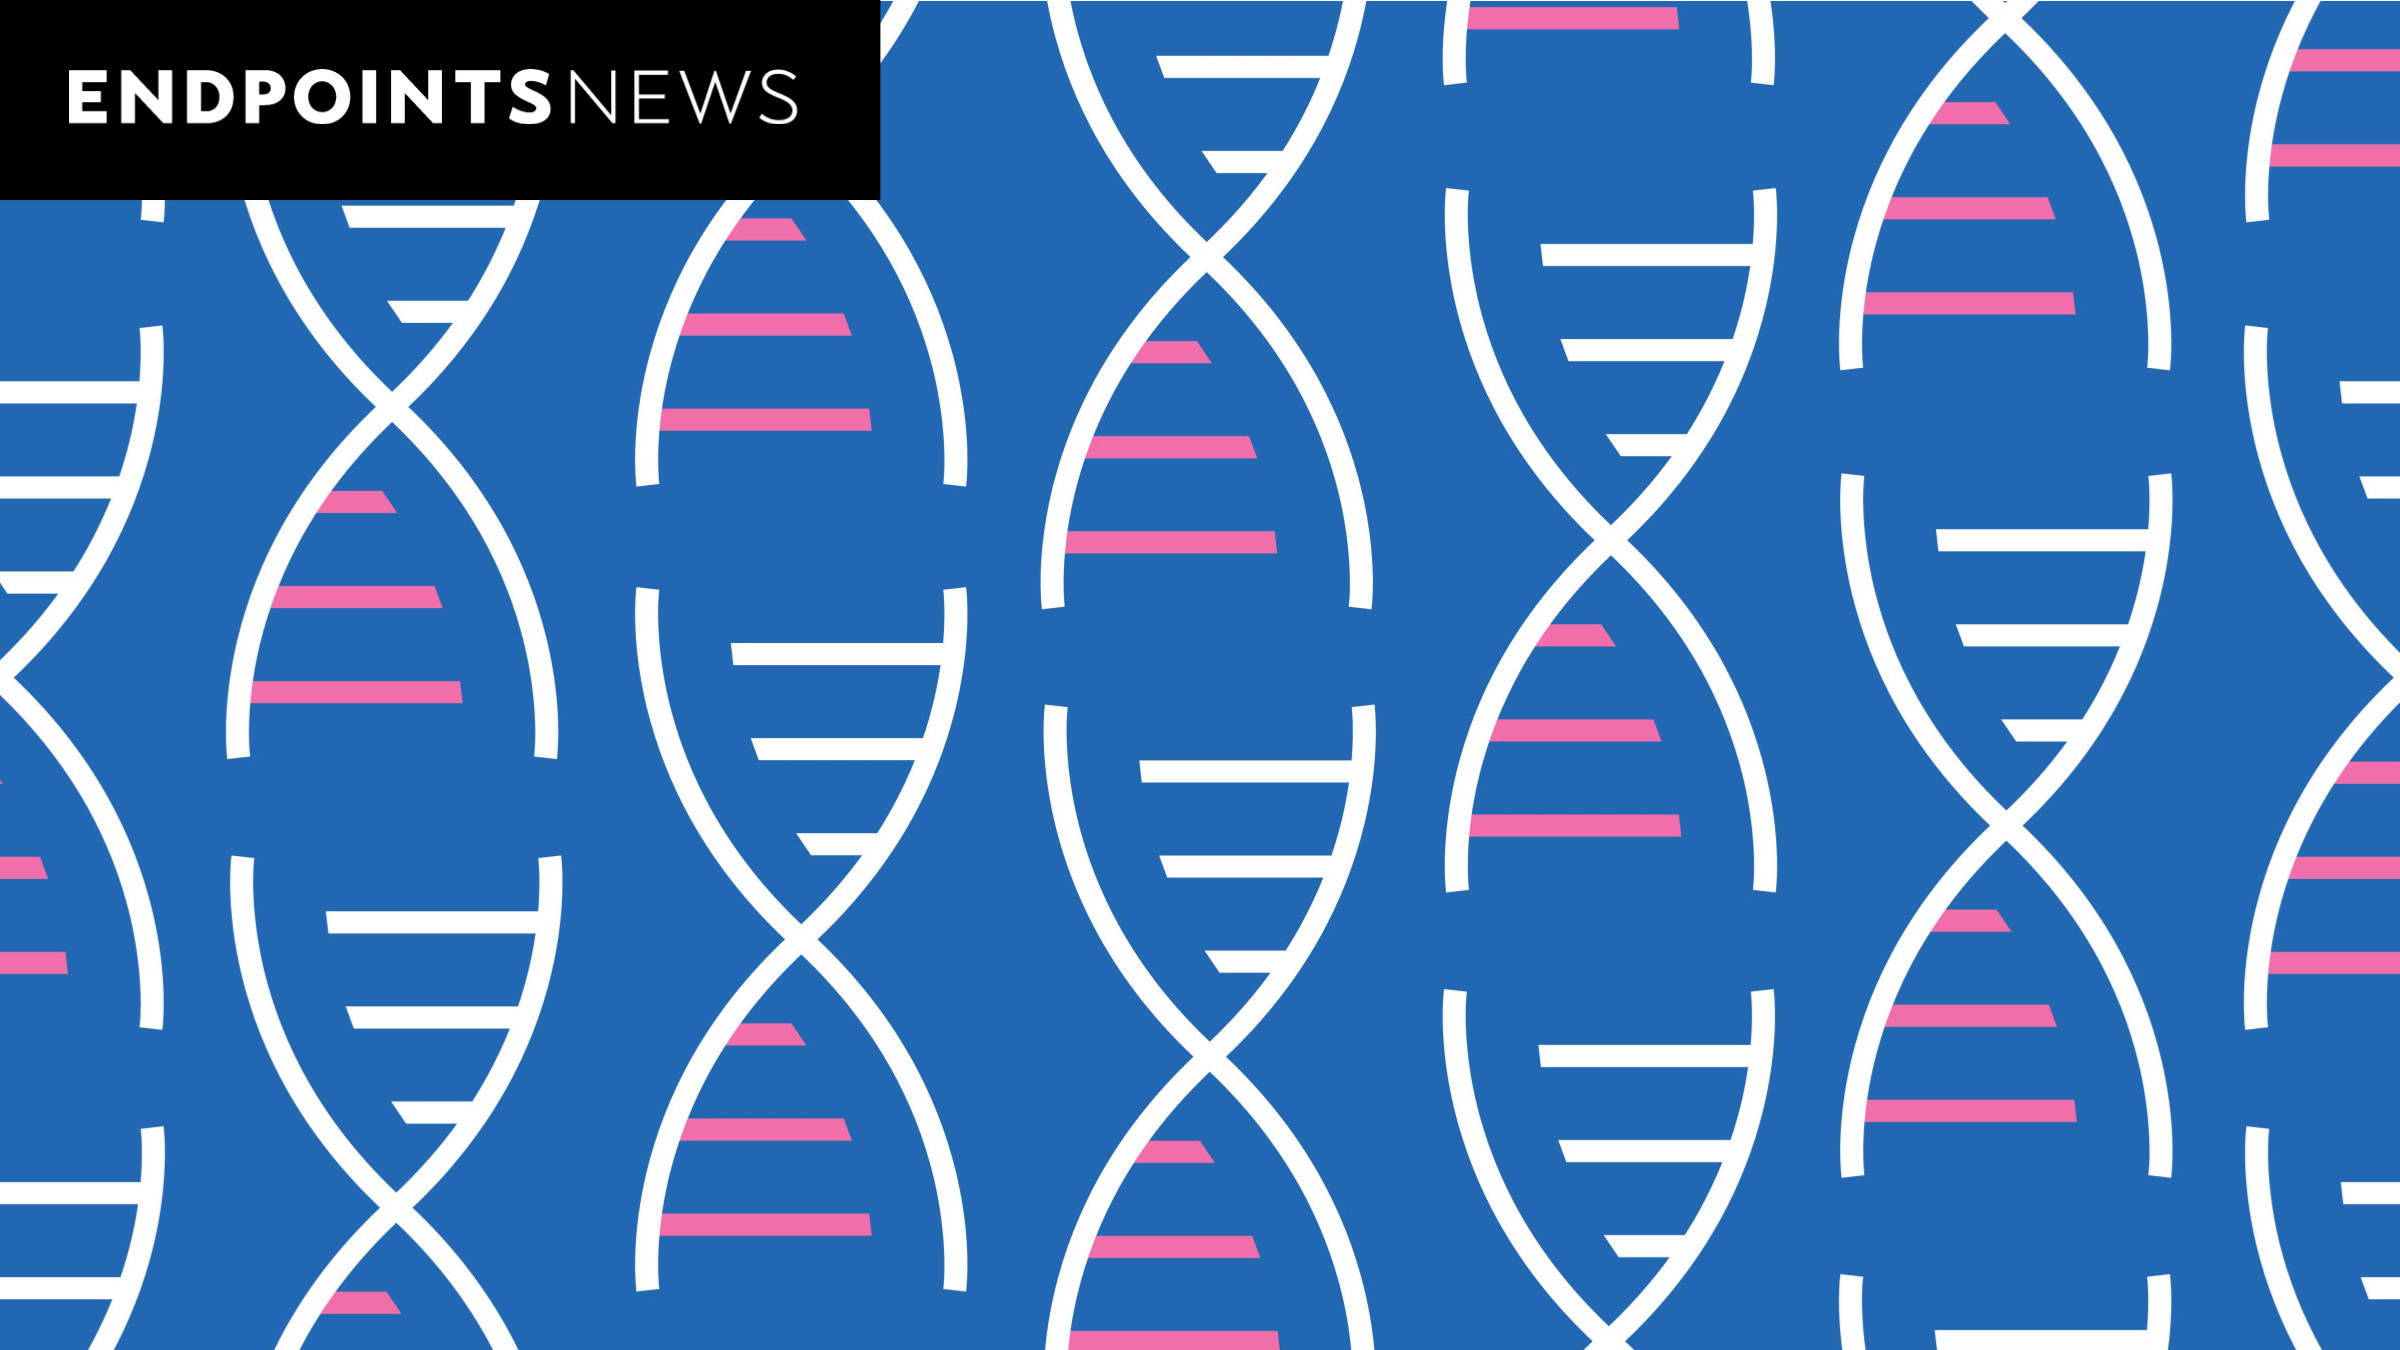 MIT researchers reveal DNA “Paste” tech behind latest gene editing startup – Endpoints News